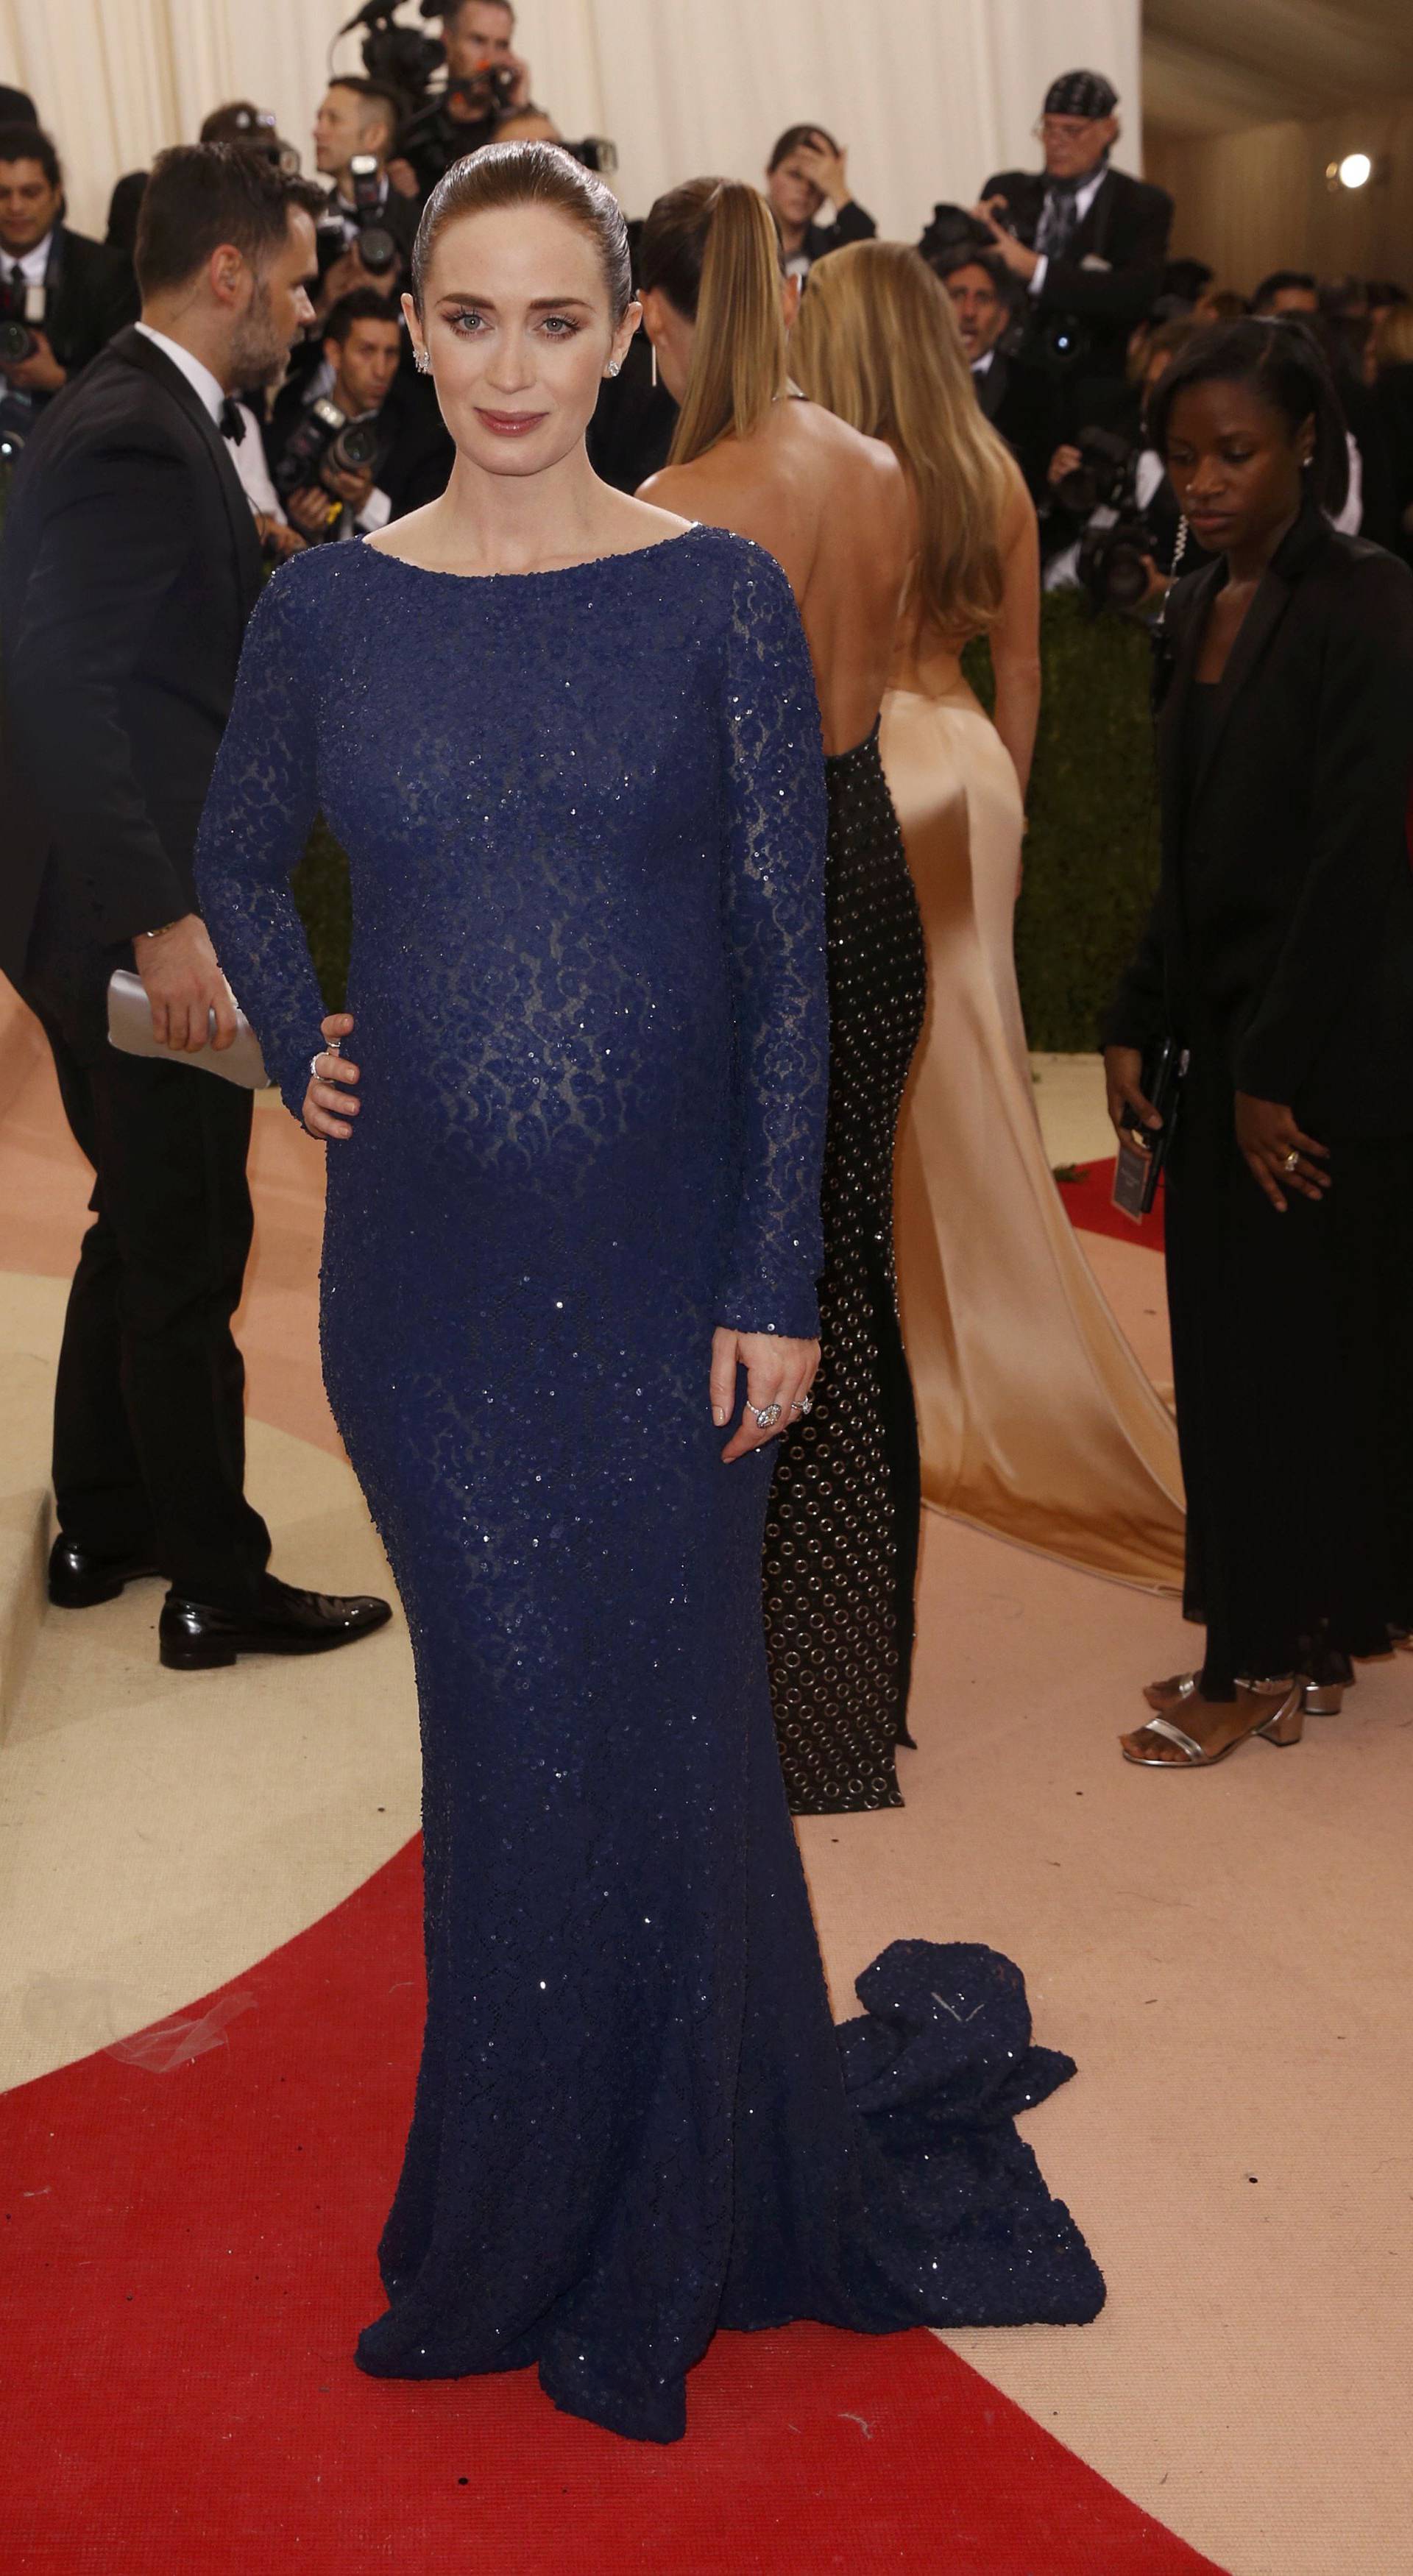 Actress Emily Blunt arrives at the Met Gala in New York